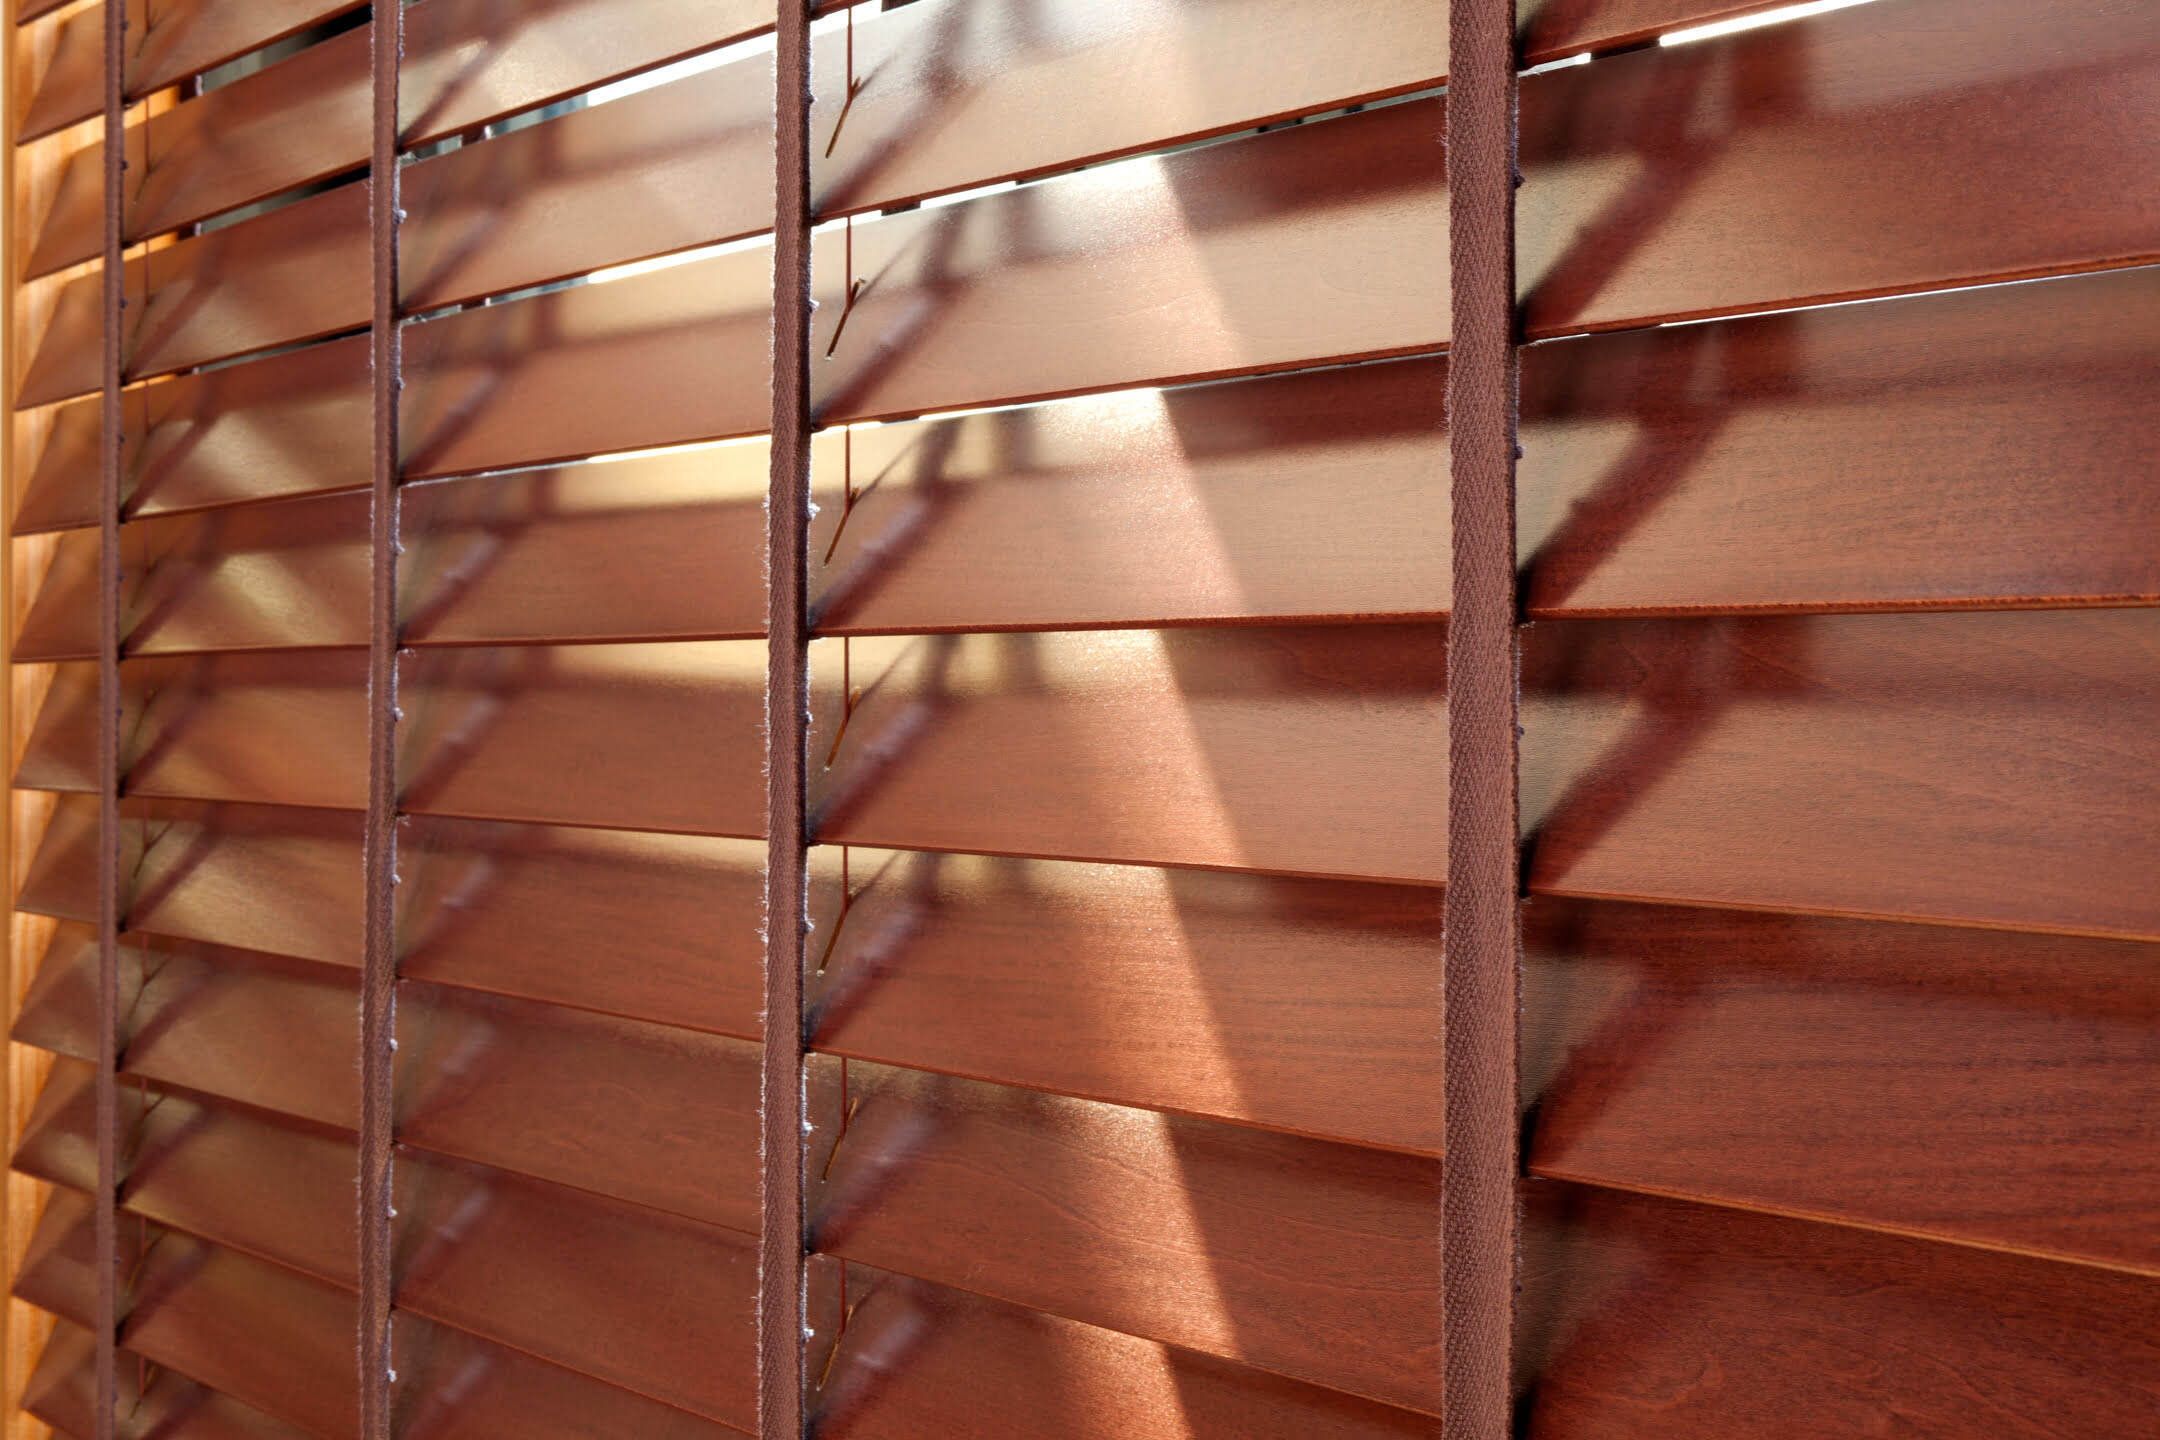 What Are Privacy Slats On Blinds